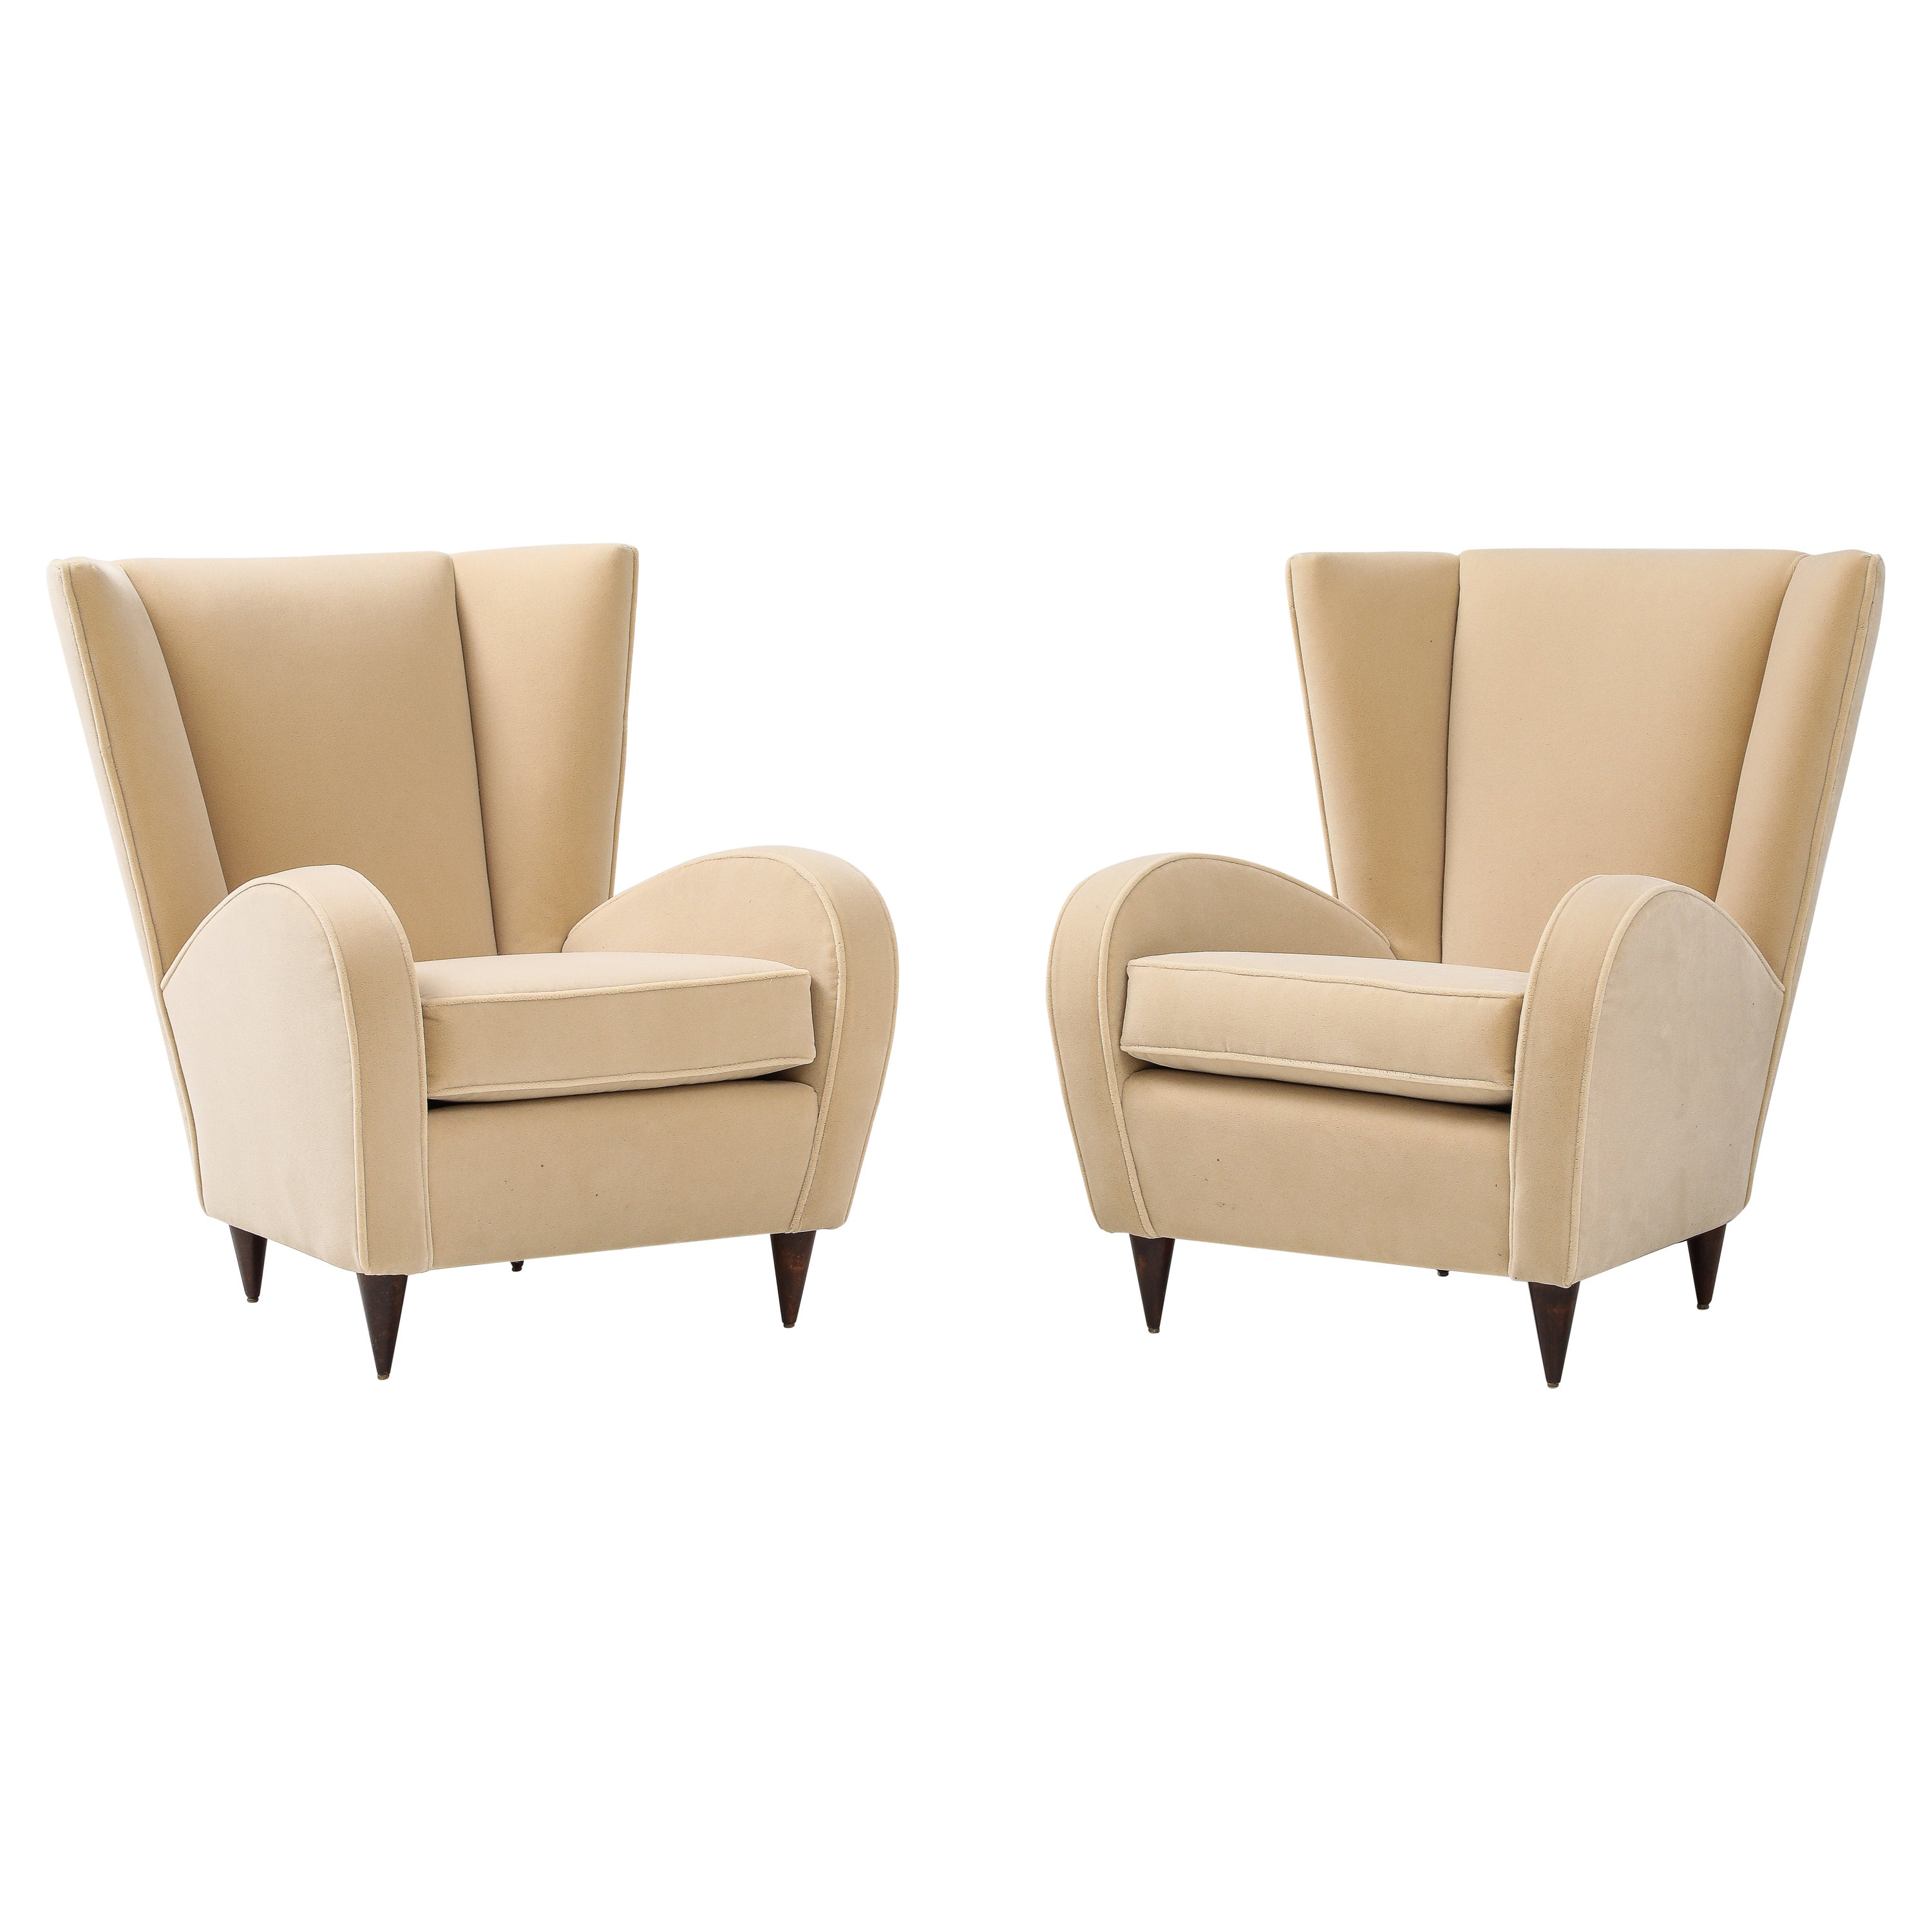 Paolo Buffa Pair of Lounge Chairs, Italy, circa 1950 For Sale